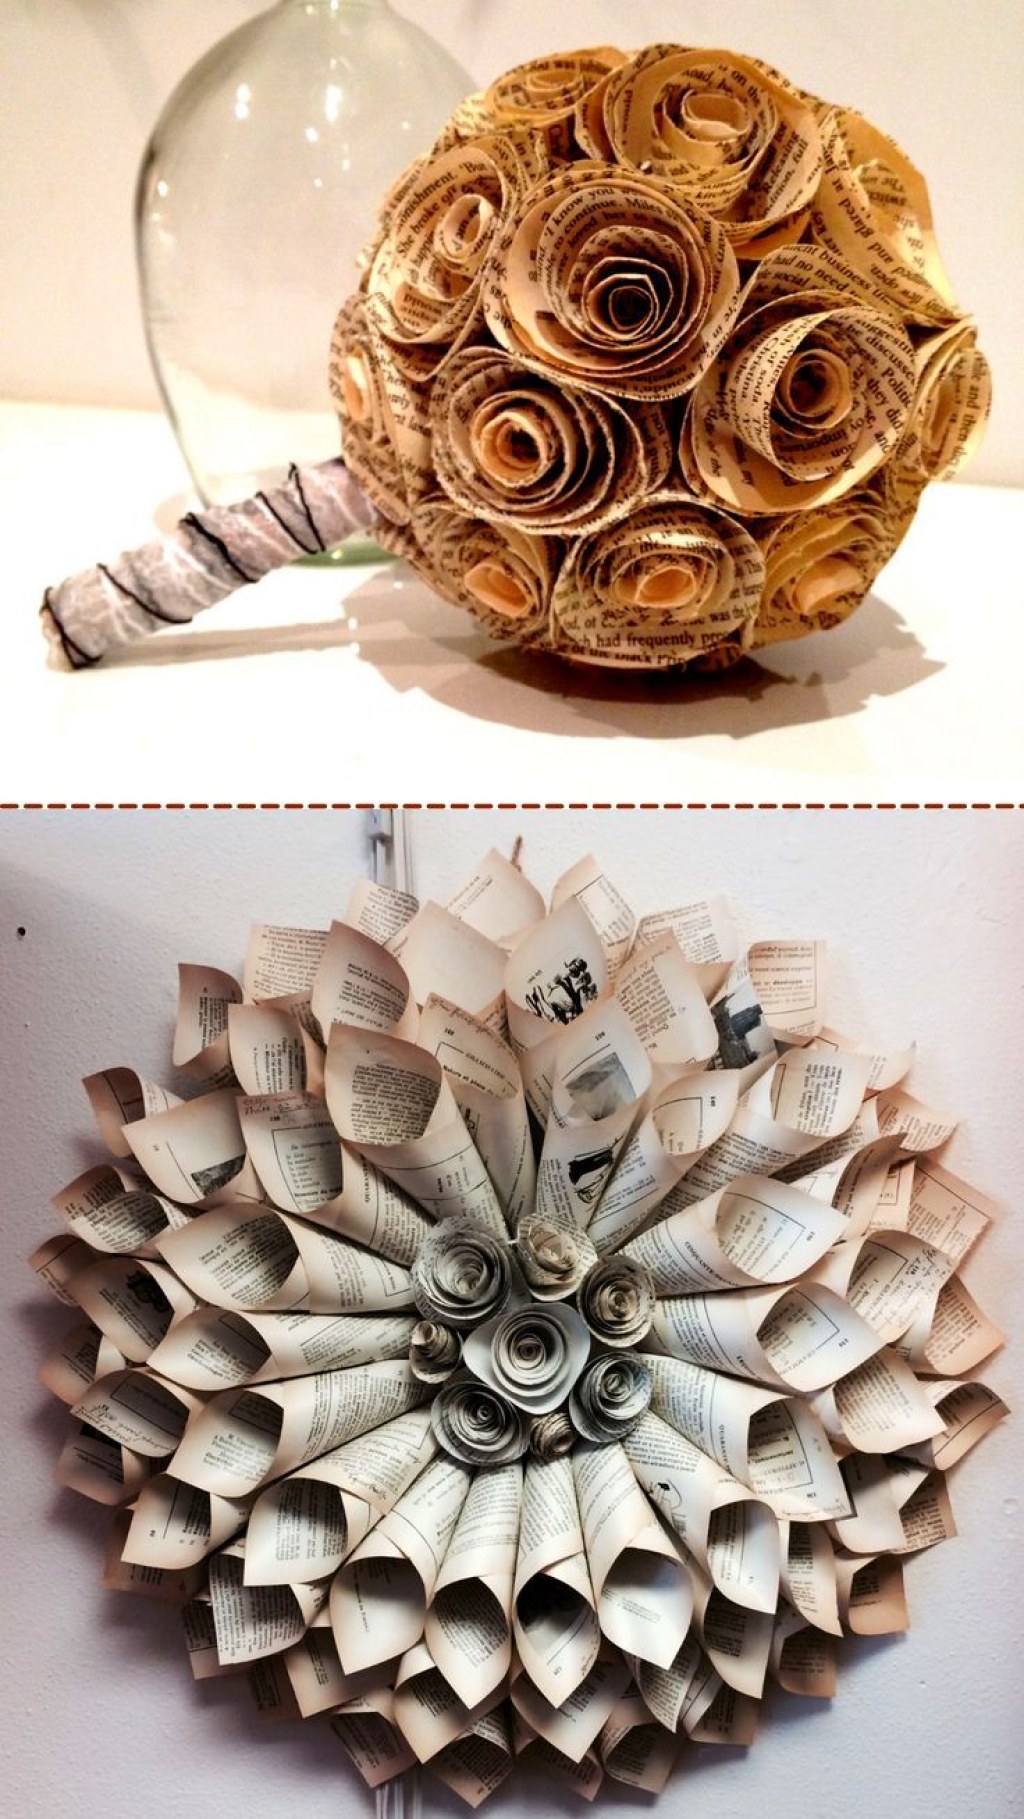 creative newspaper decoration ideas - Pin on diy and crafts